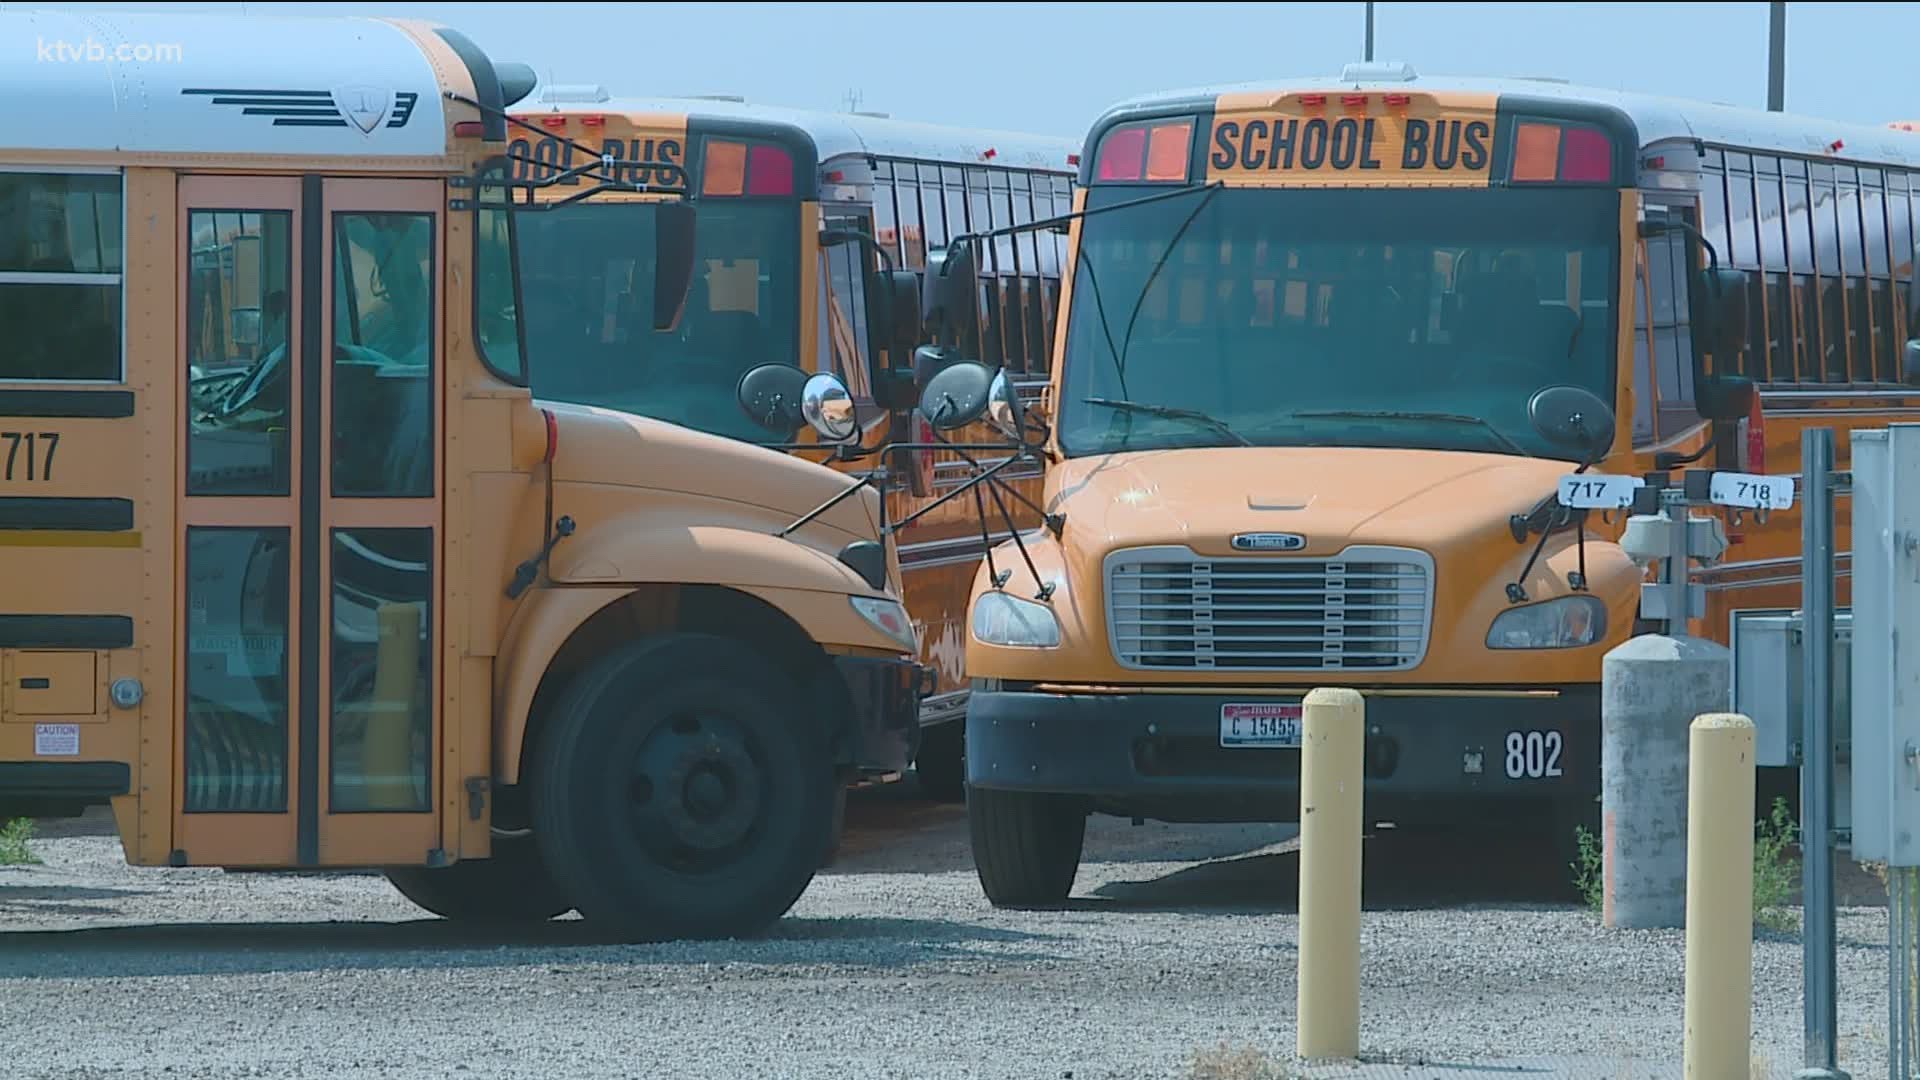 The Brown Bus Company says they are looking forward to when students get back on the bus and are taking extra measures to keep them safe.